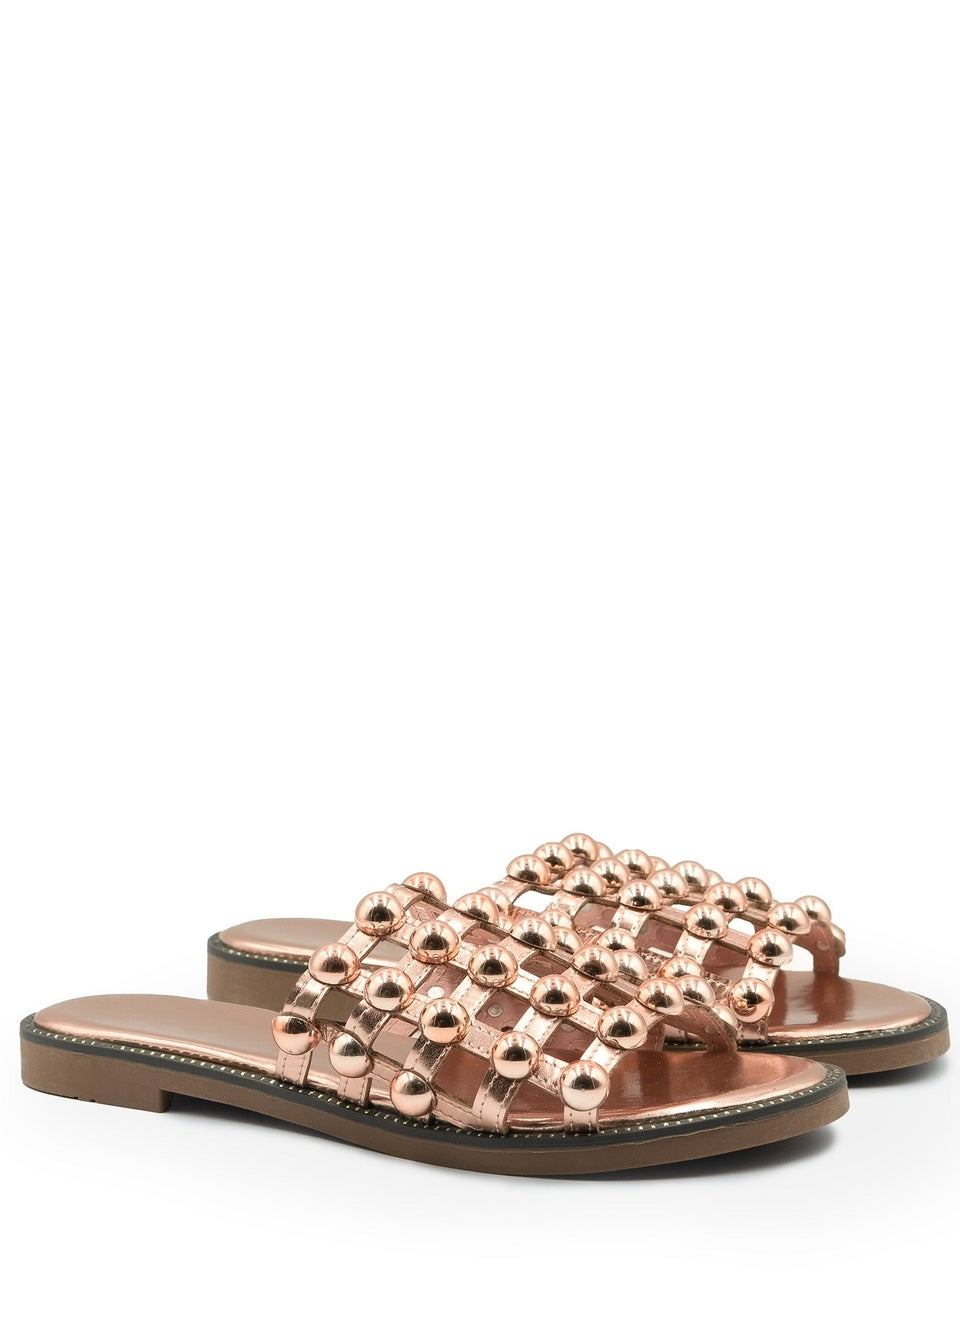 Where's That From Rosegold Pu Kelly Sliders With Studded Detailing